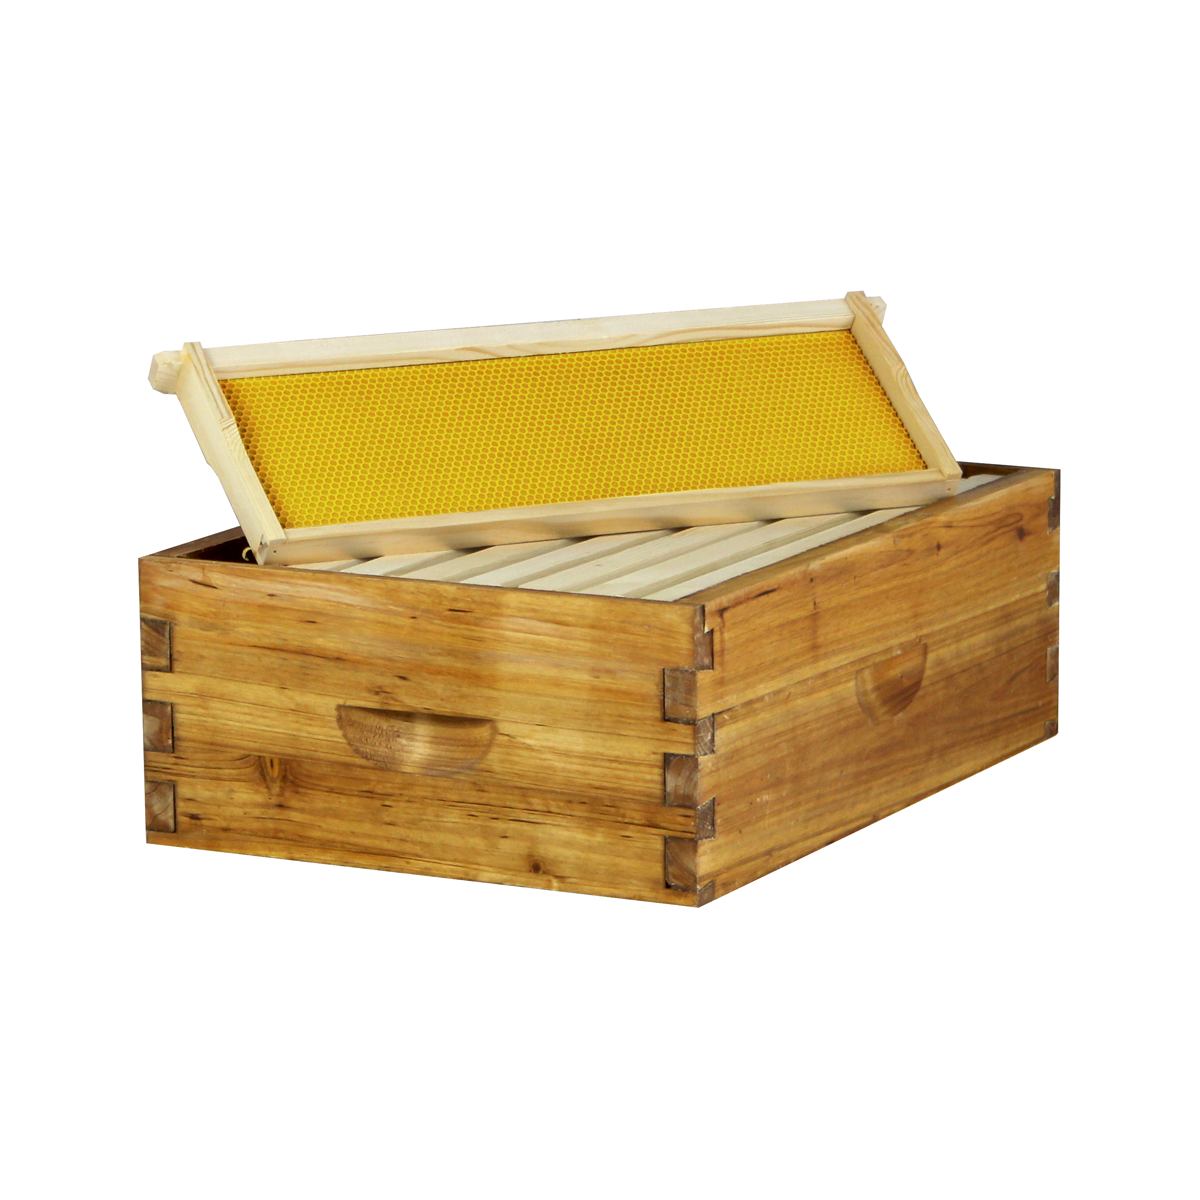 Hoover Hives Wax Coated 8 Frame Medium Honey Super Box With Frames & Foundations